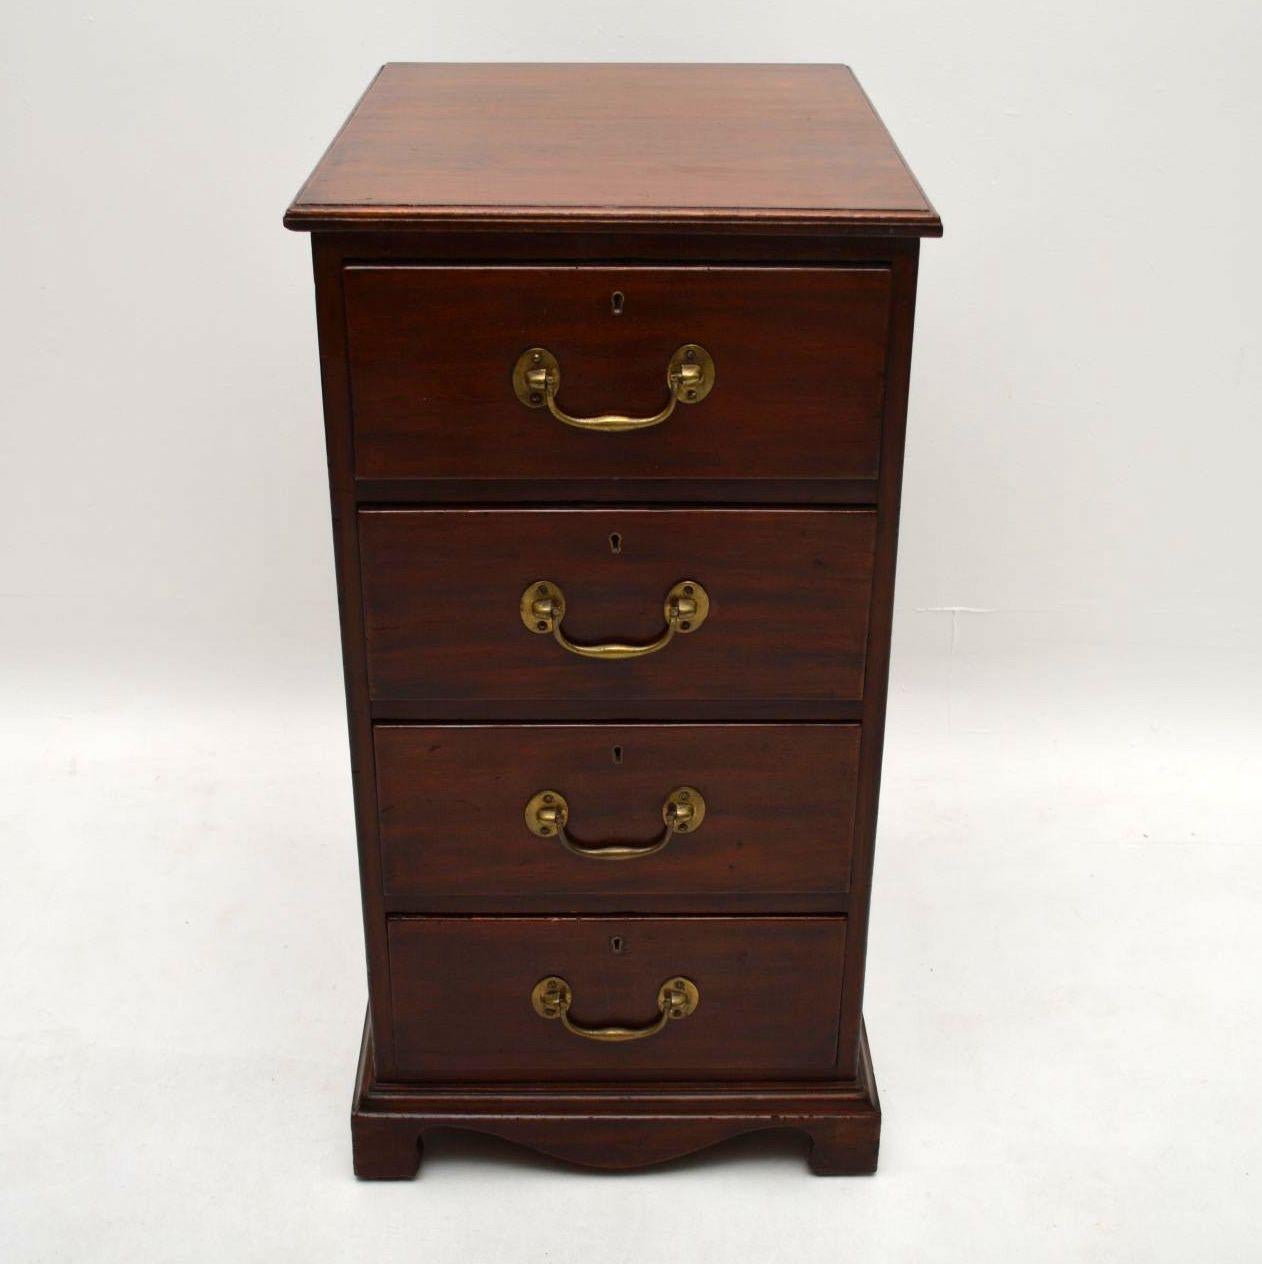 This antique mahogany chest of drawers has quite slim & deep proportions, almost like a filing cabinet size. In fact, maybe it was a filing cabinet.

It’s in good original condition & is Georgian in style, dating from circa 1890-1910 period. There